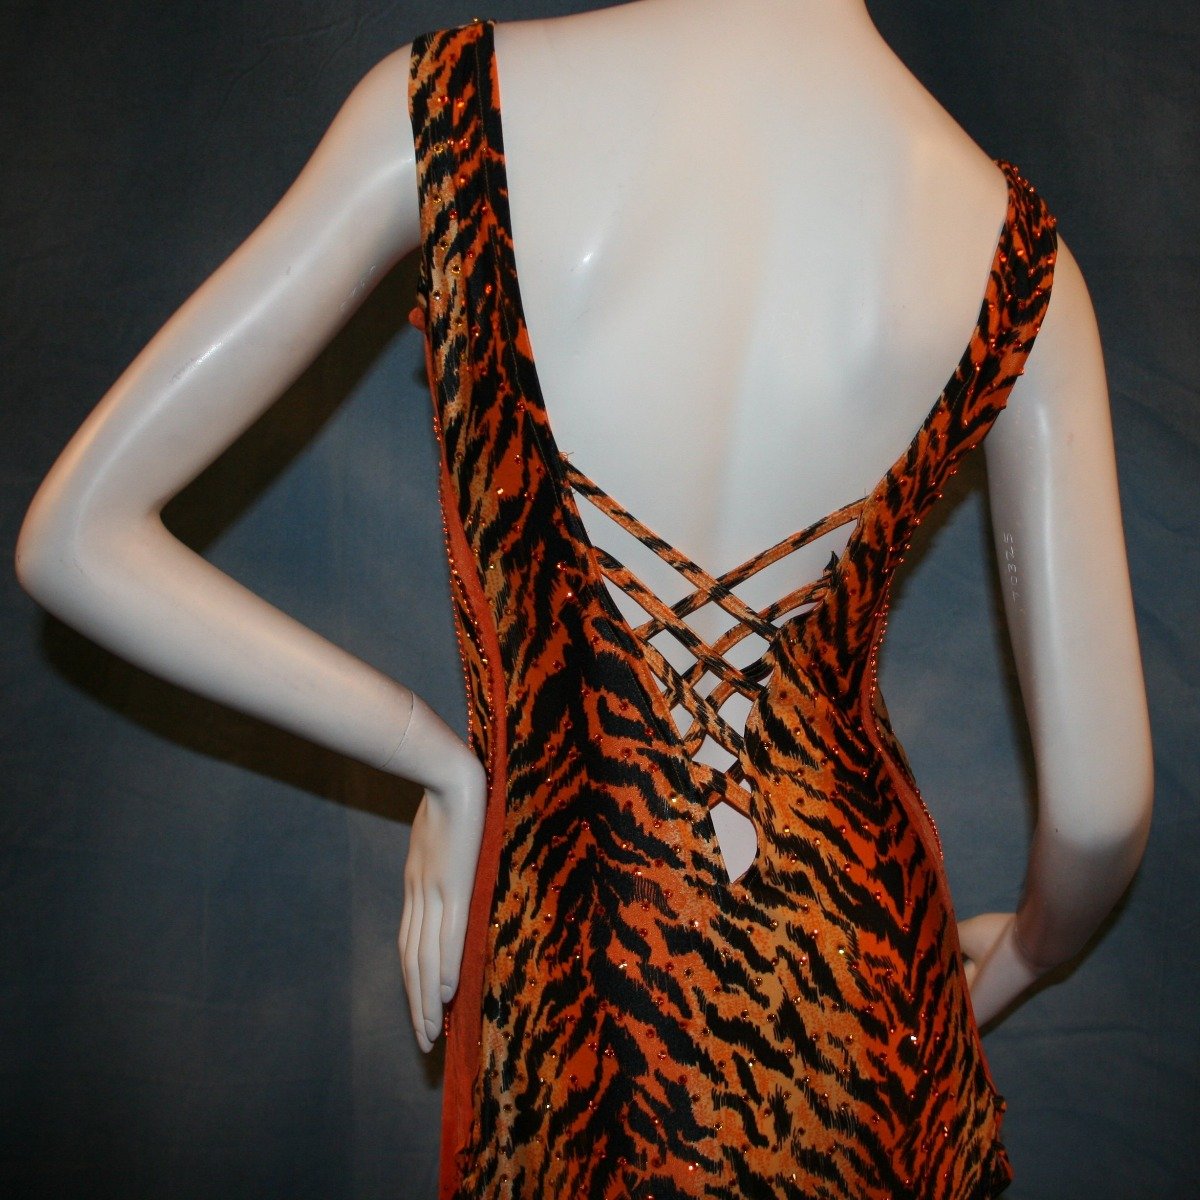 Crystal's Creations close up back view of orange & black tiger print Latin/rhythm dress with orange chandelle feathers & hand beading